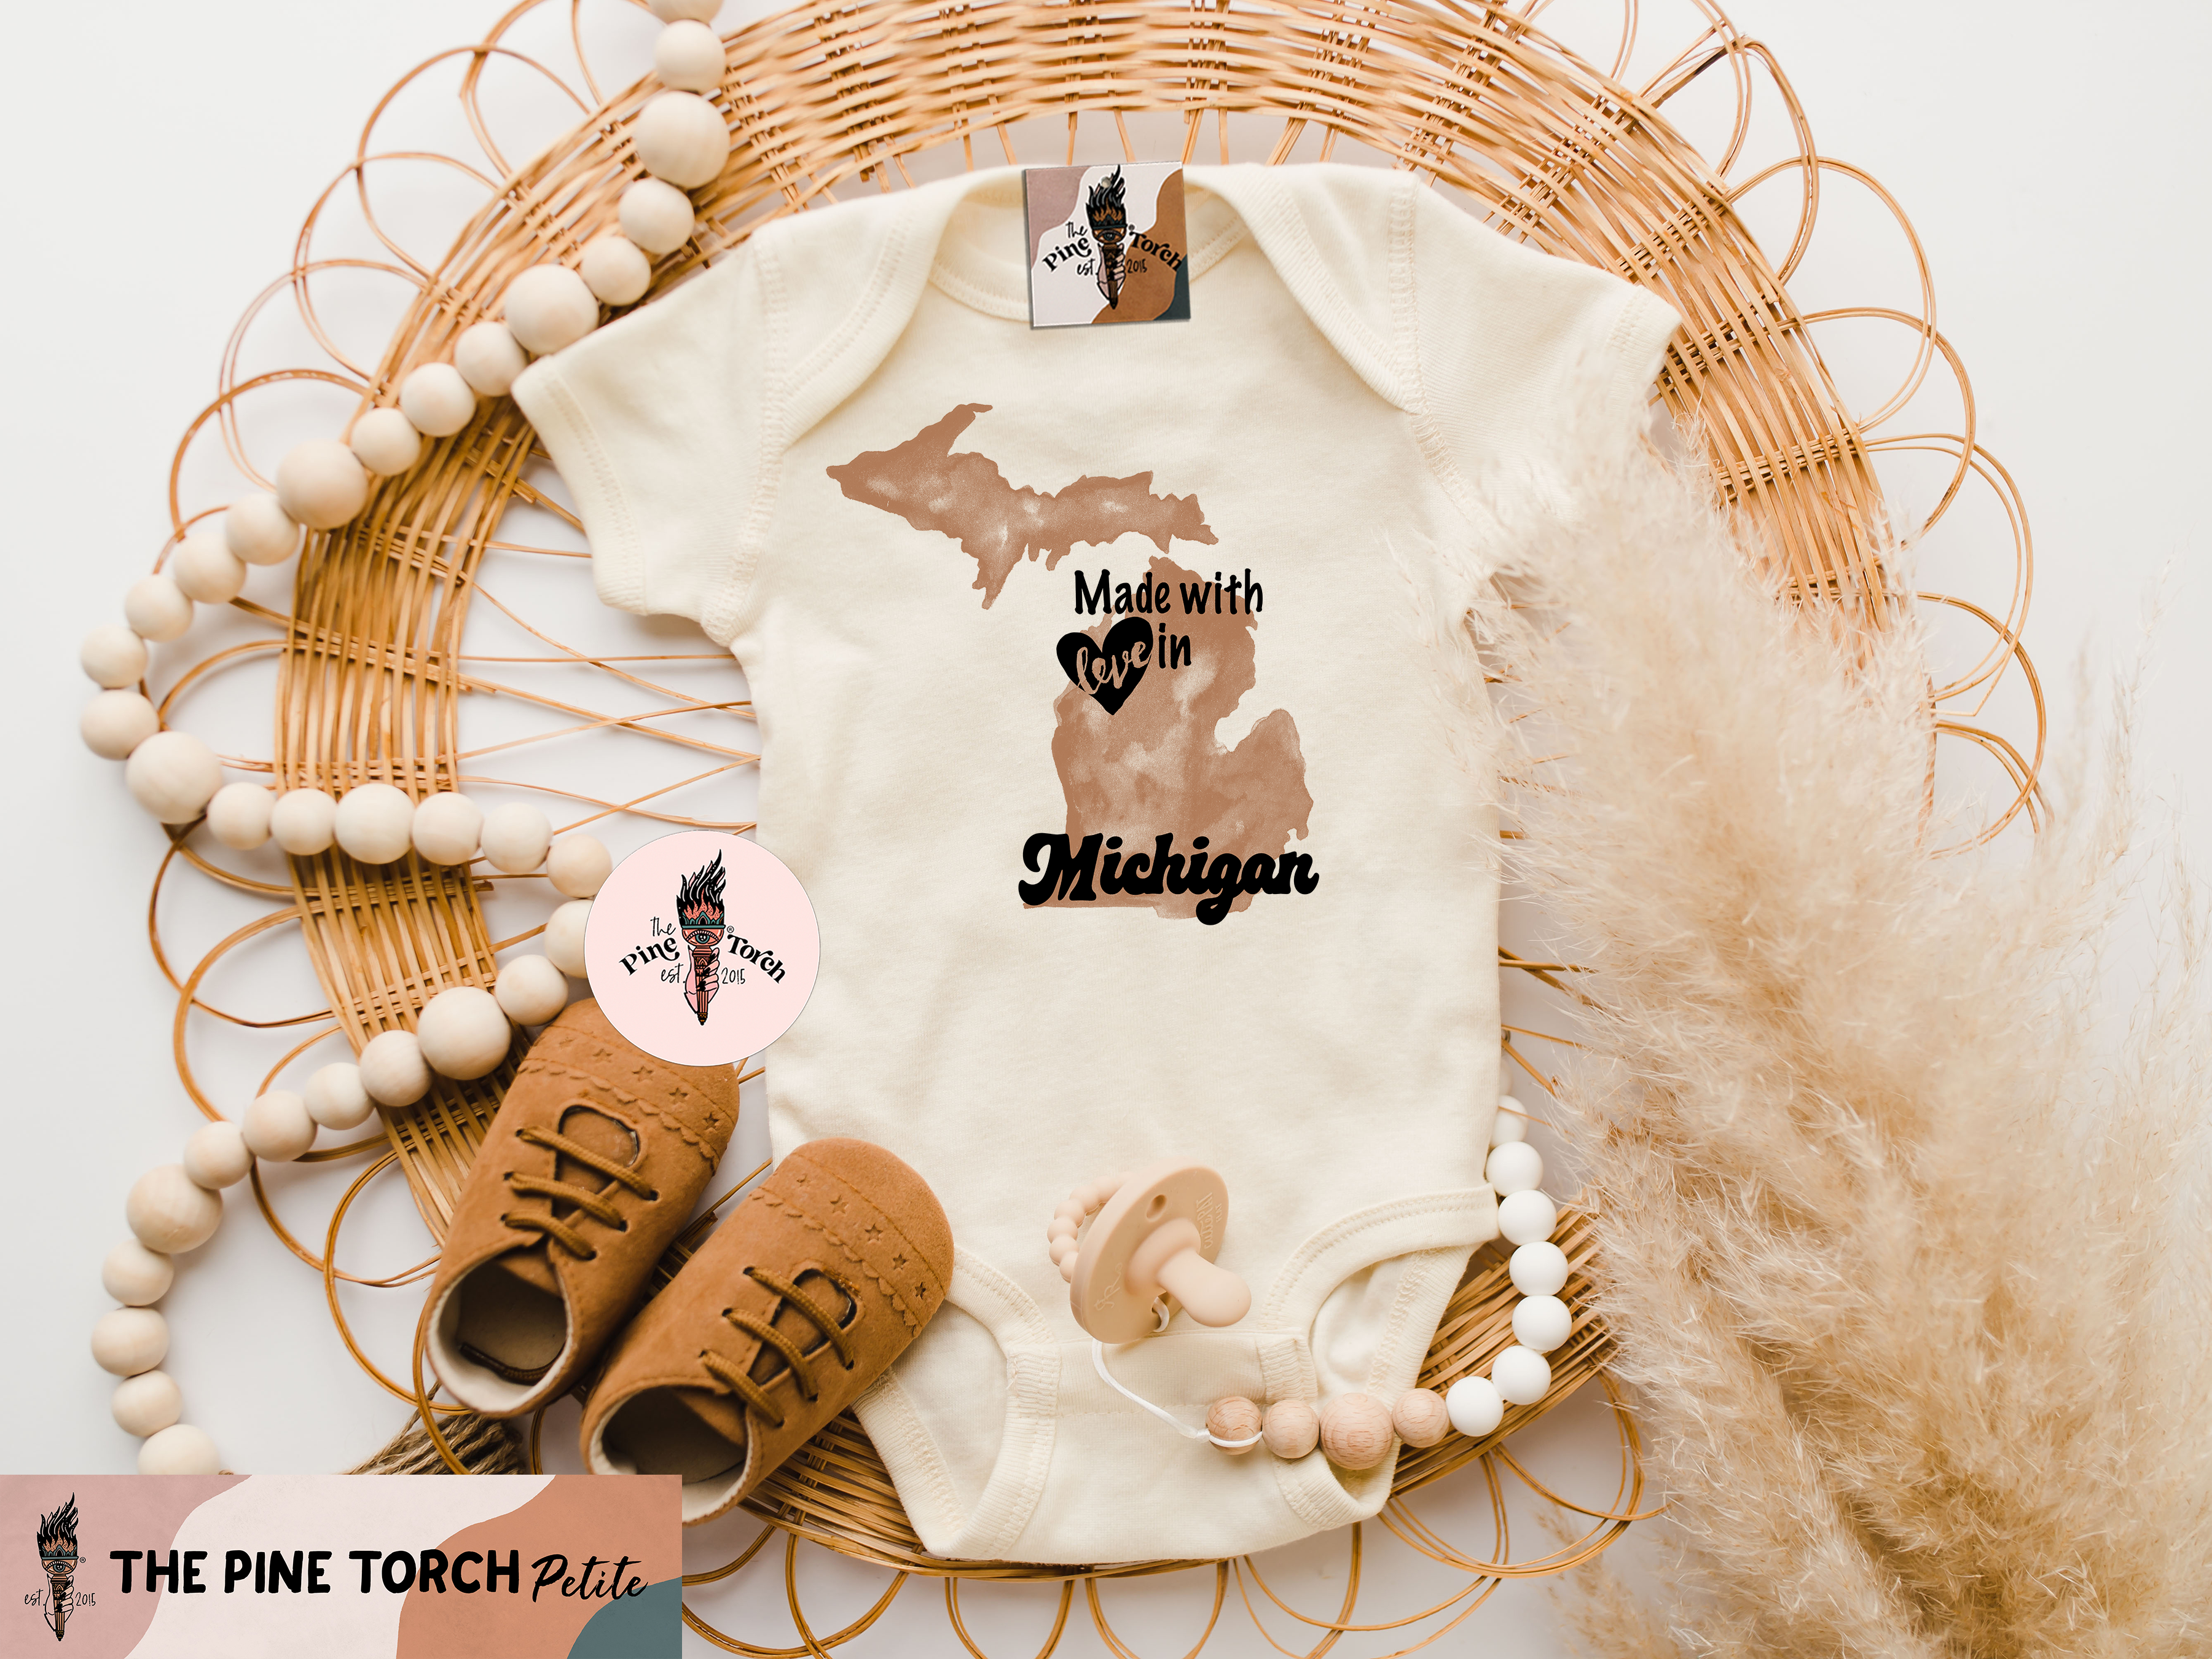 « MADE WITH LOVE IN MICHIGAN » BODYSUIT